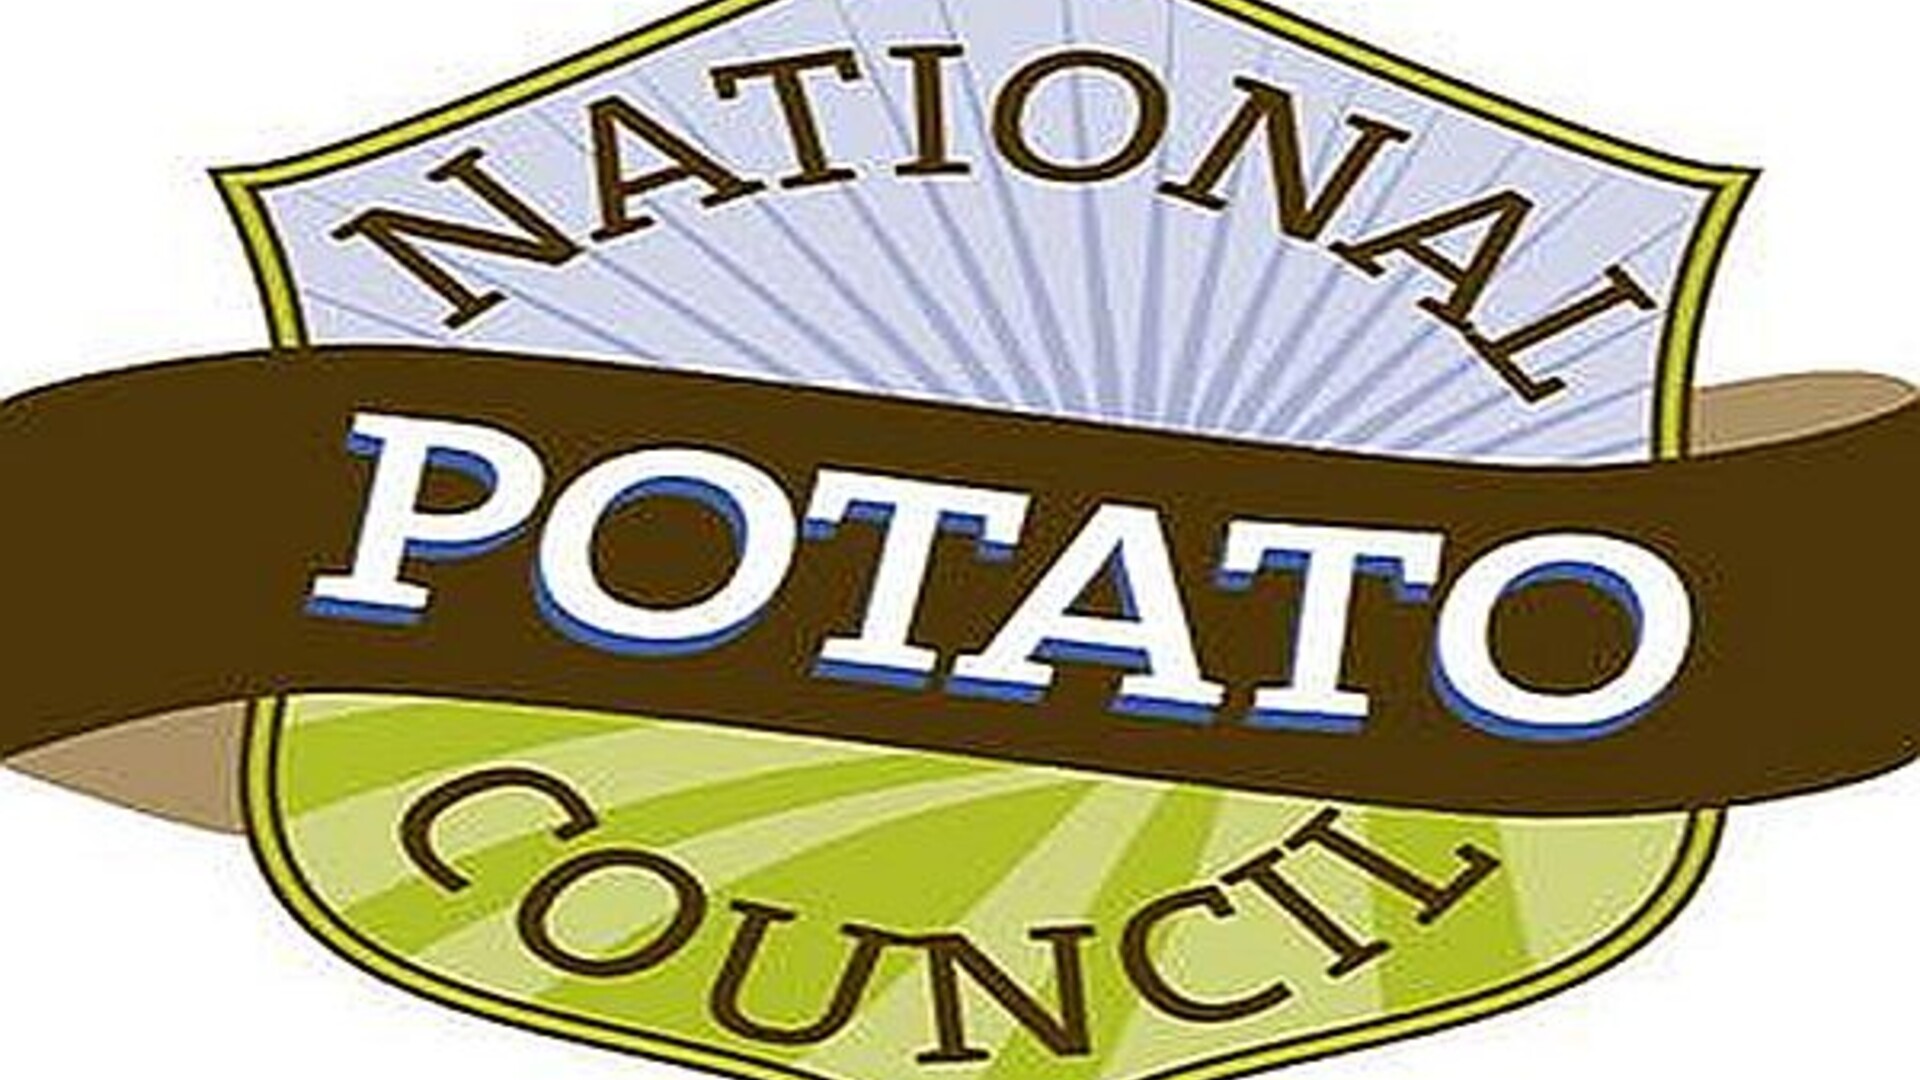 Mexico Ruling on U.S. Potatoes Pt 2